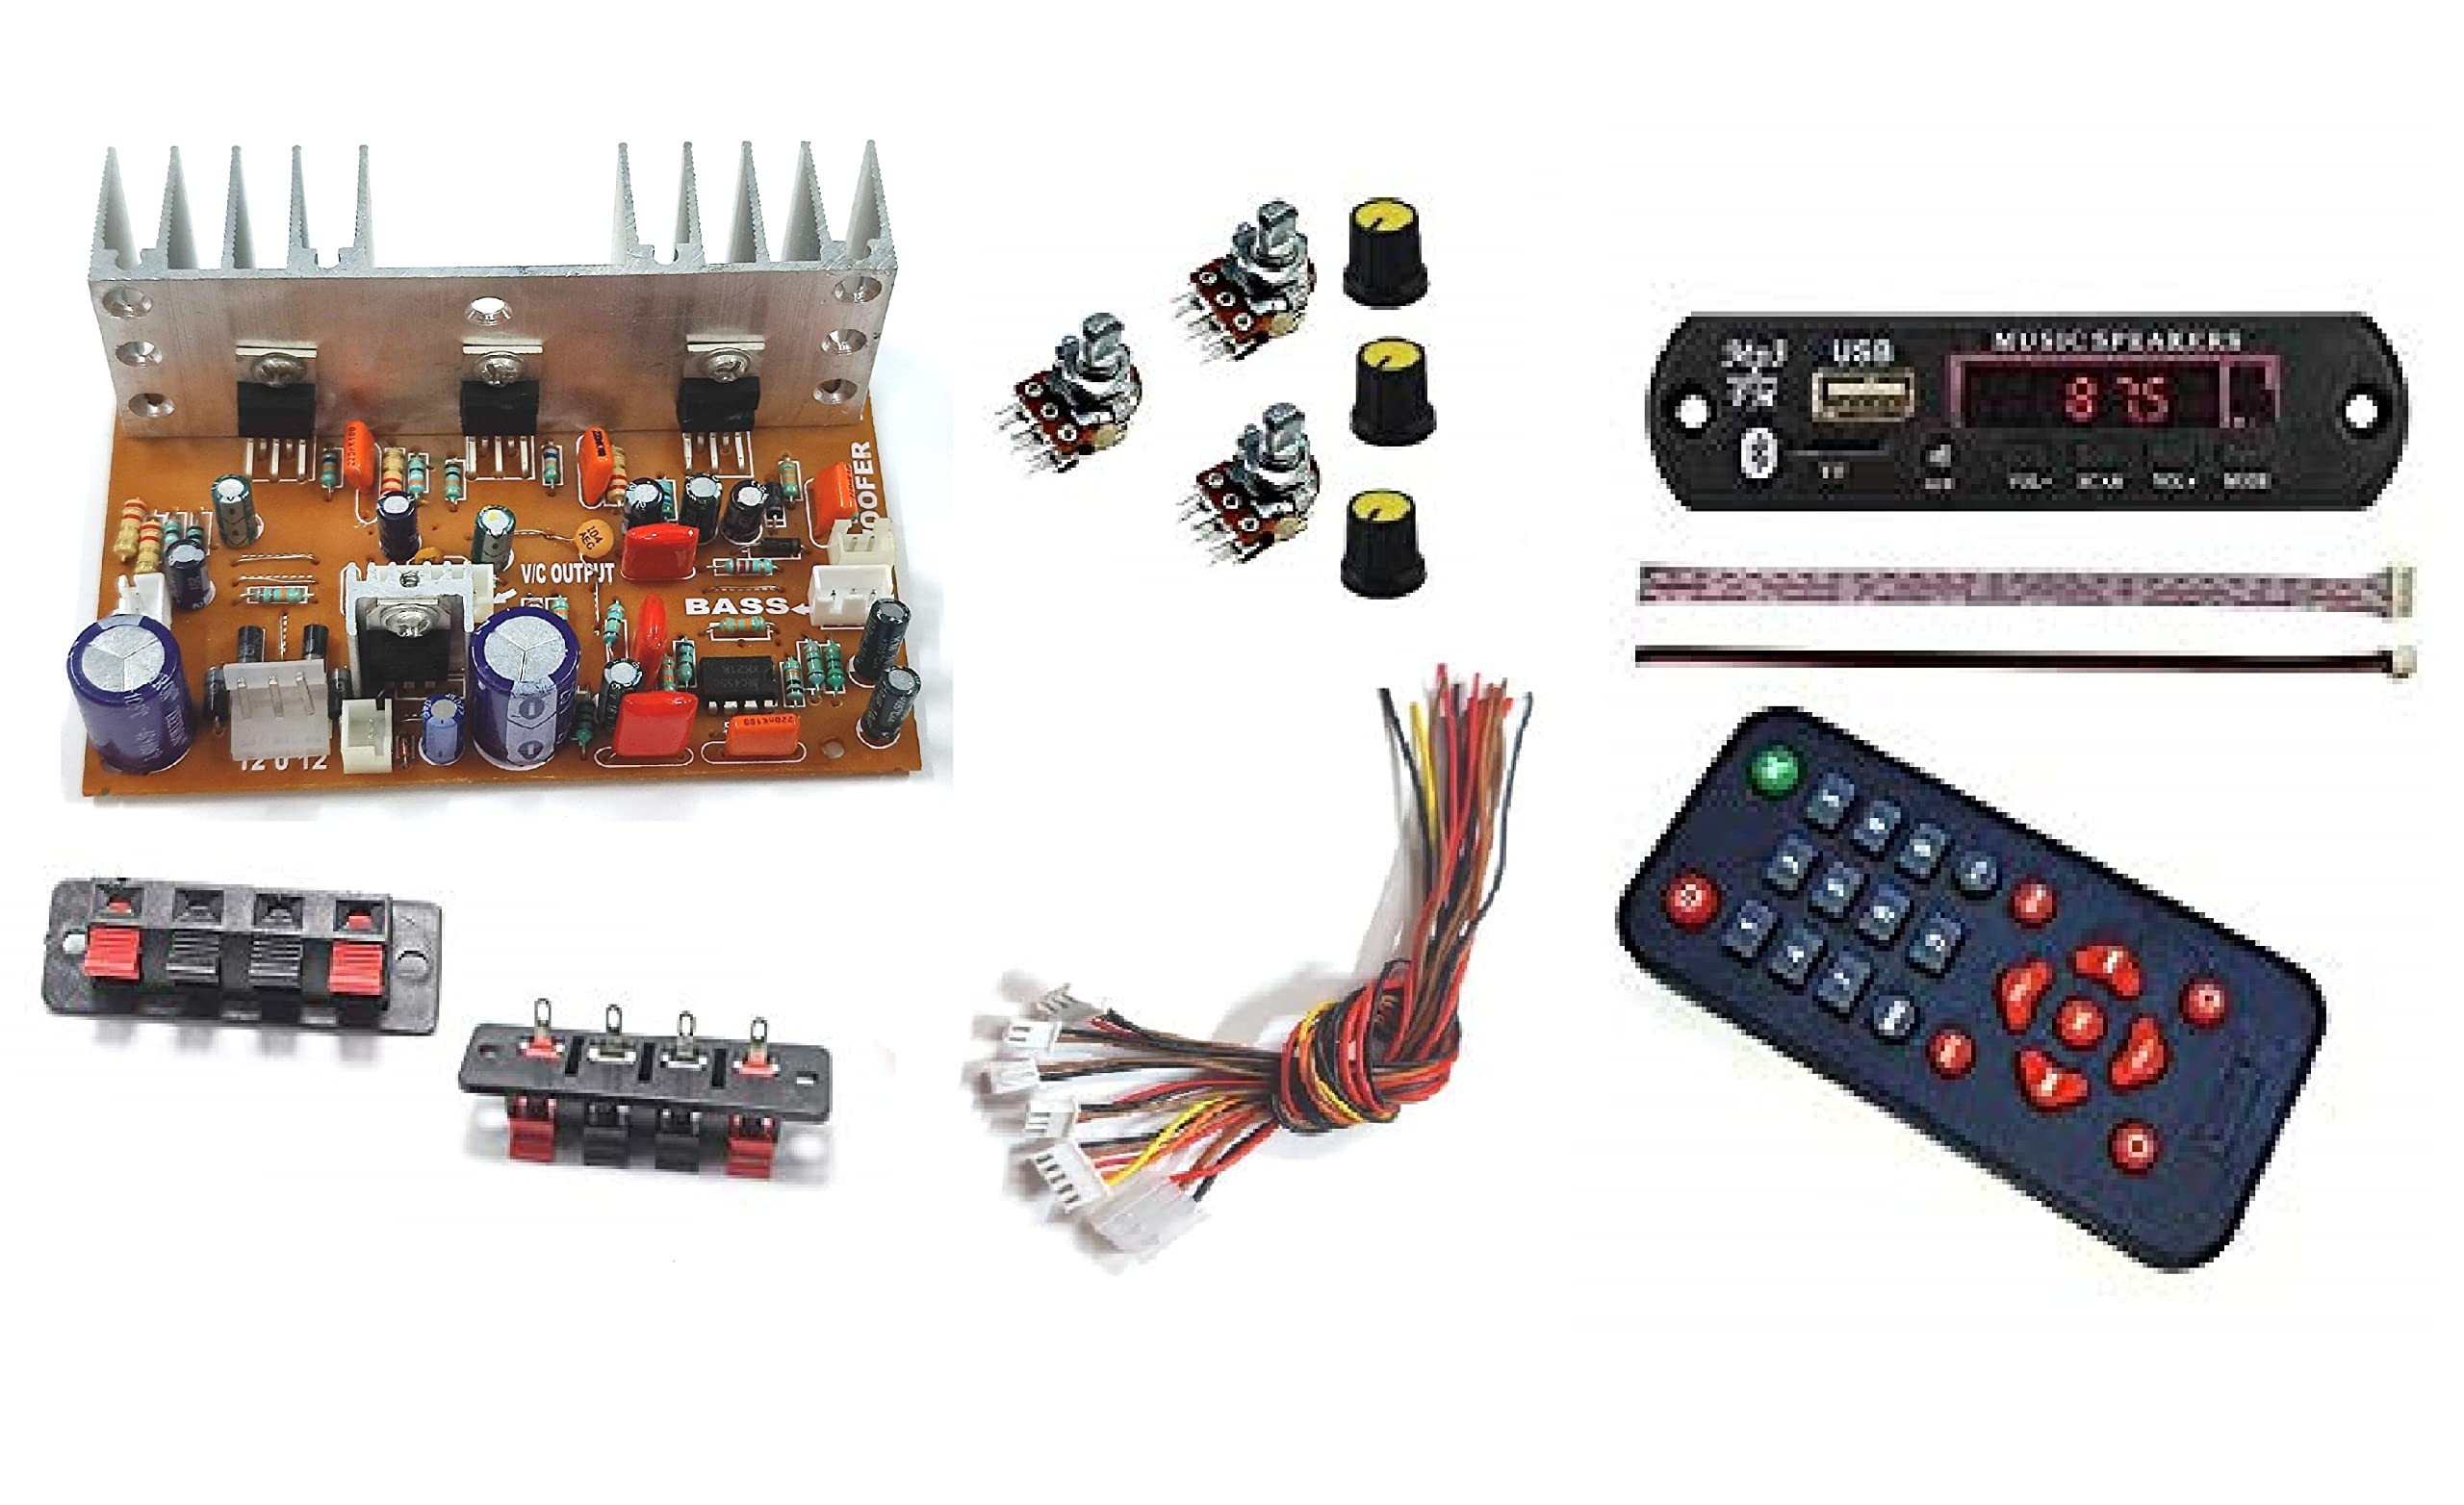 MEKtronics 2.1 Amplifier Board kit Home Theater Board Amplifier Circuit  with Bass Boost and Treble Support TDA2030 Based with Bluetooth FM USB Aux  Card MP3 Stereo Audio Player DIY Kit : Amazon.in: